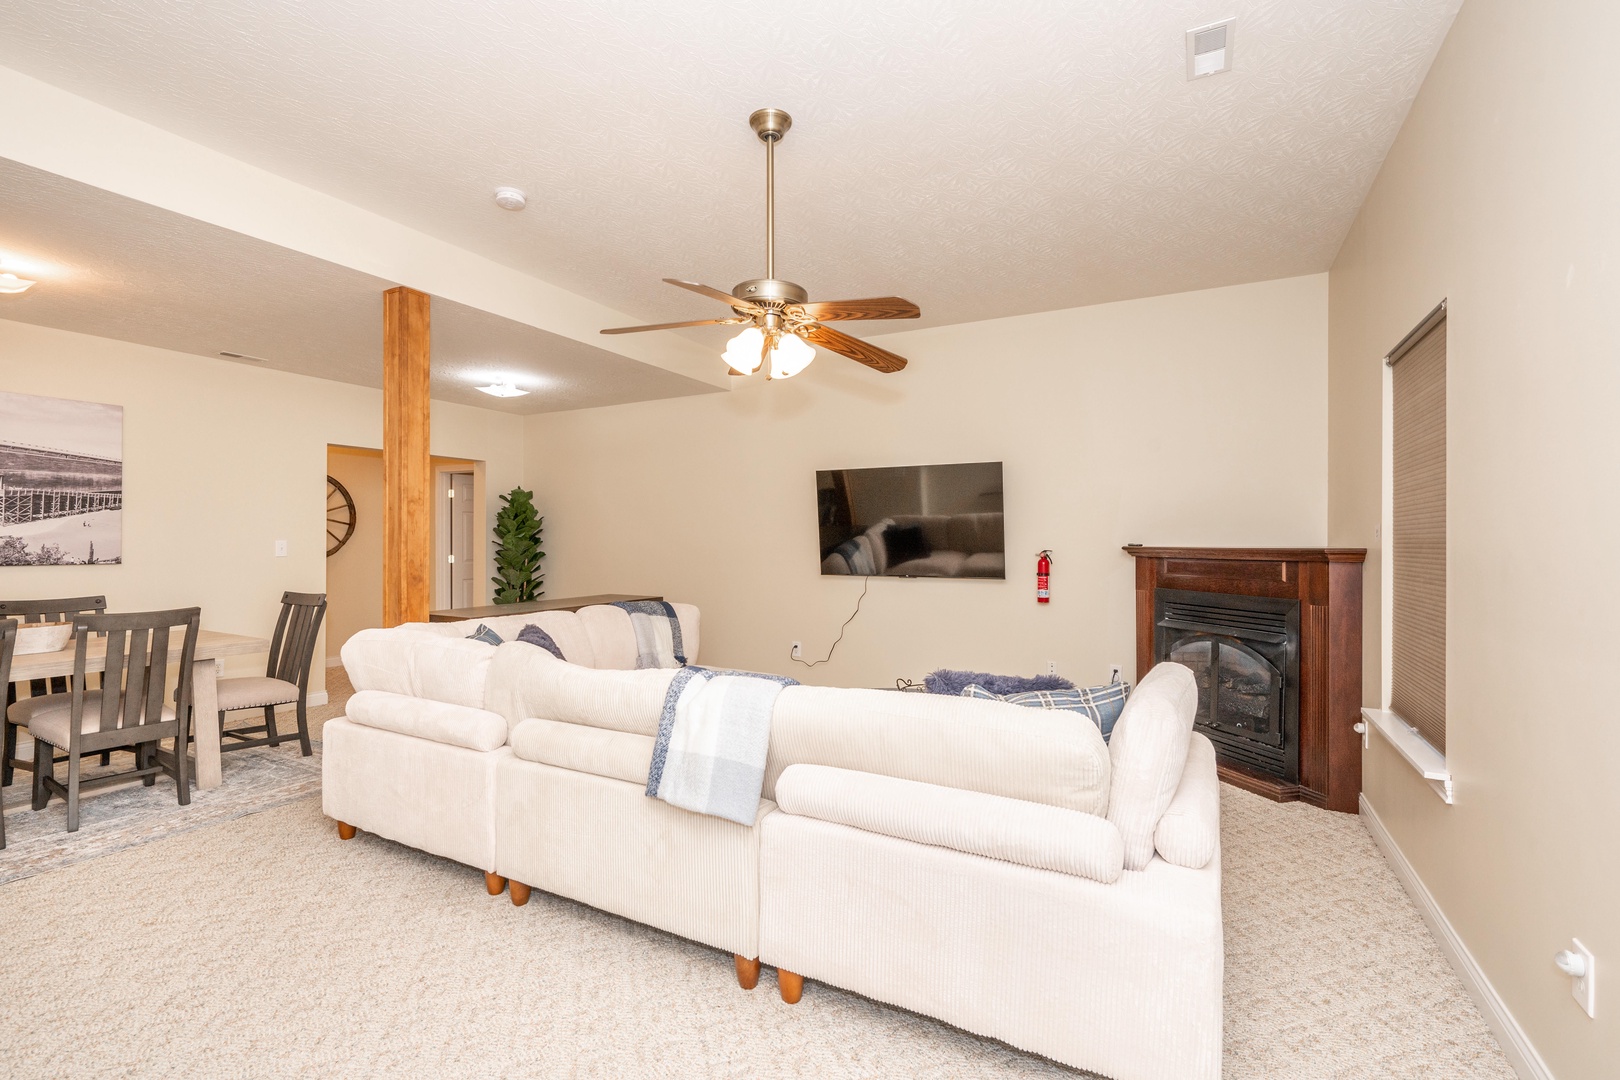 Basement living area with ample seating, additional dining table, and Smart TV